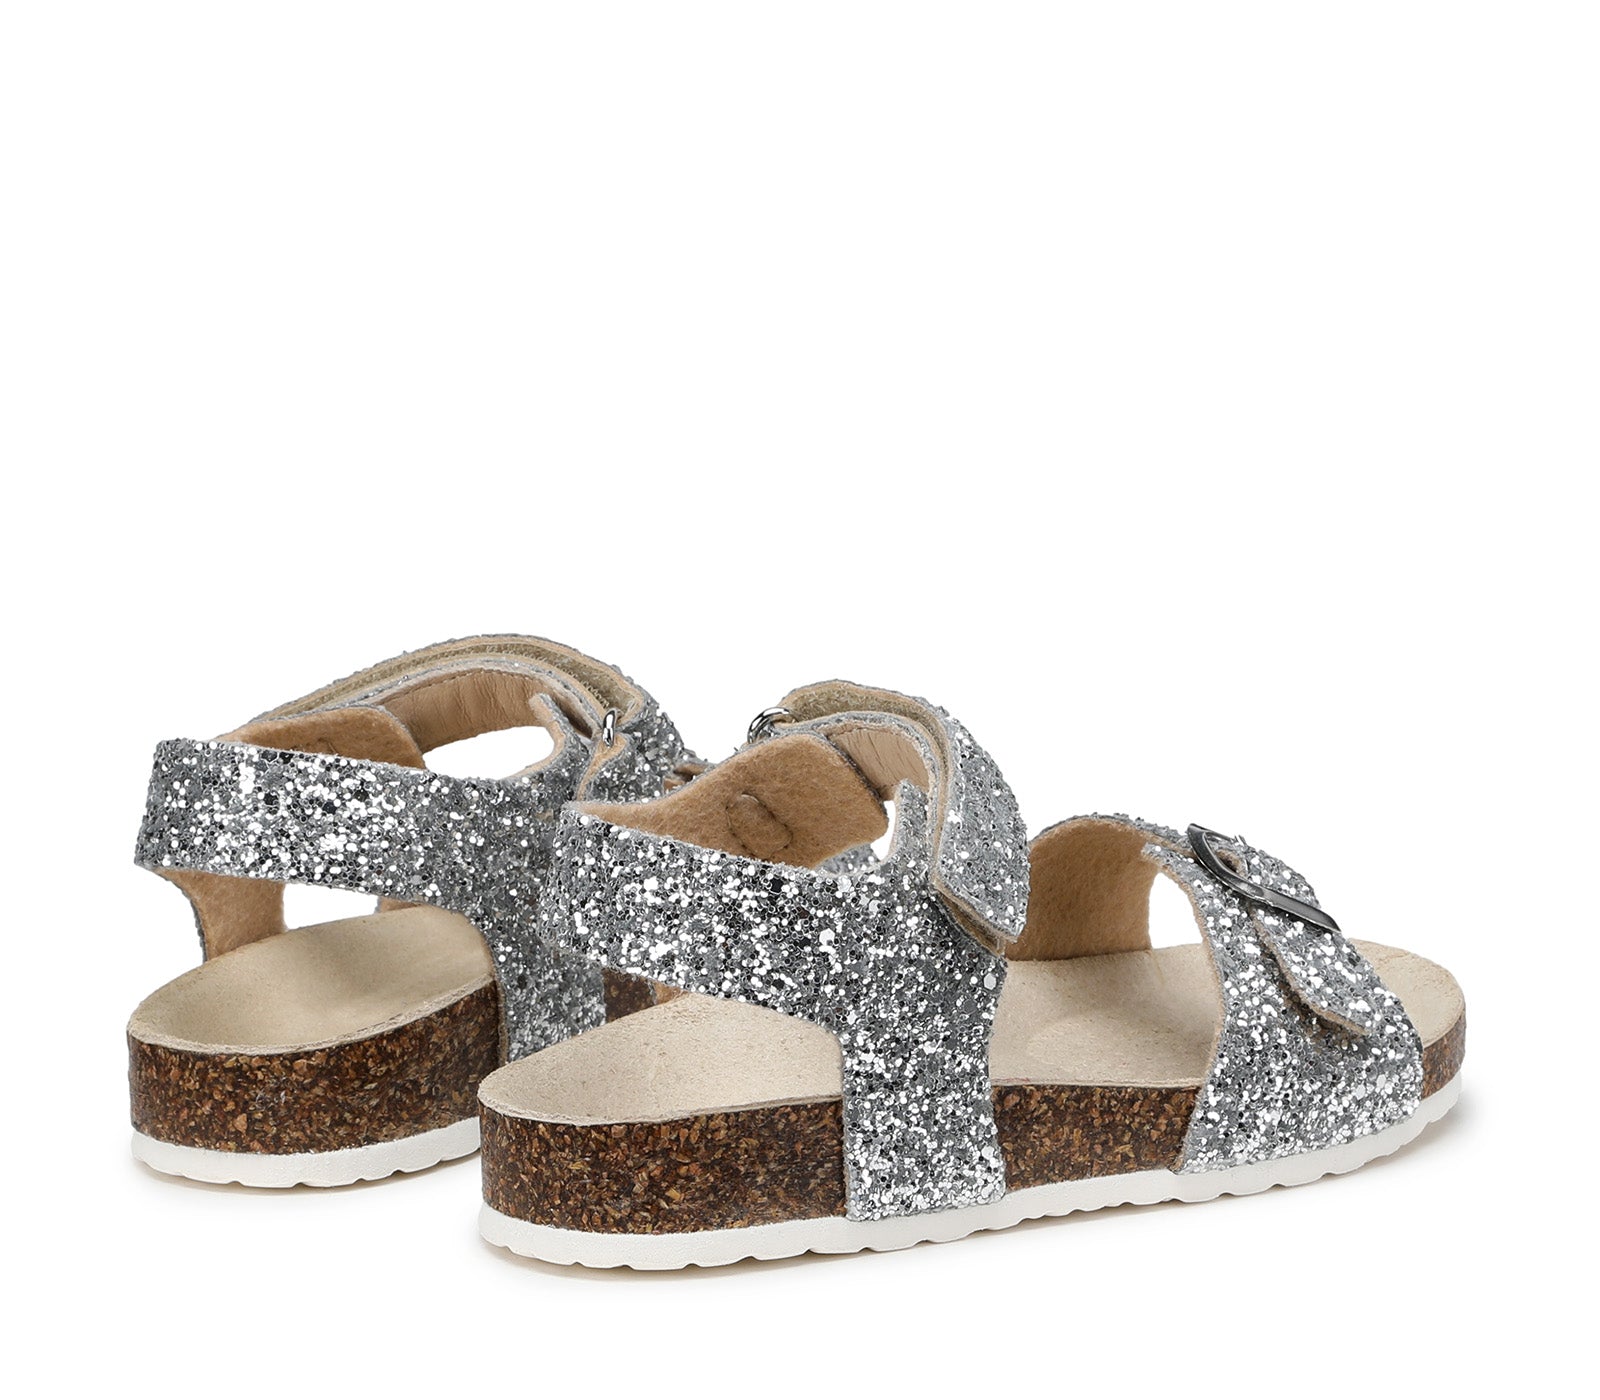 Children's Silver Glitter Sandals with Velcro Closure and Contoured Insole